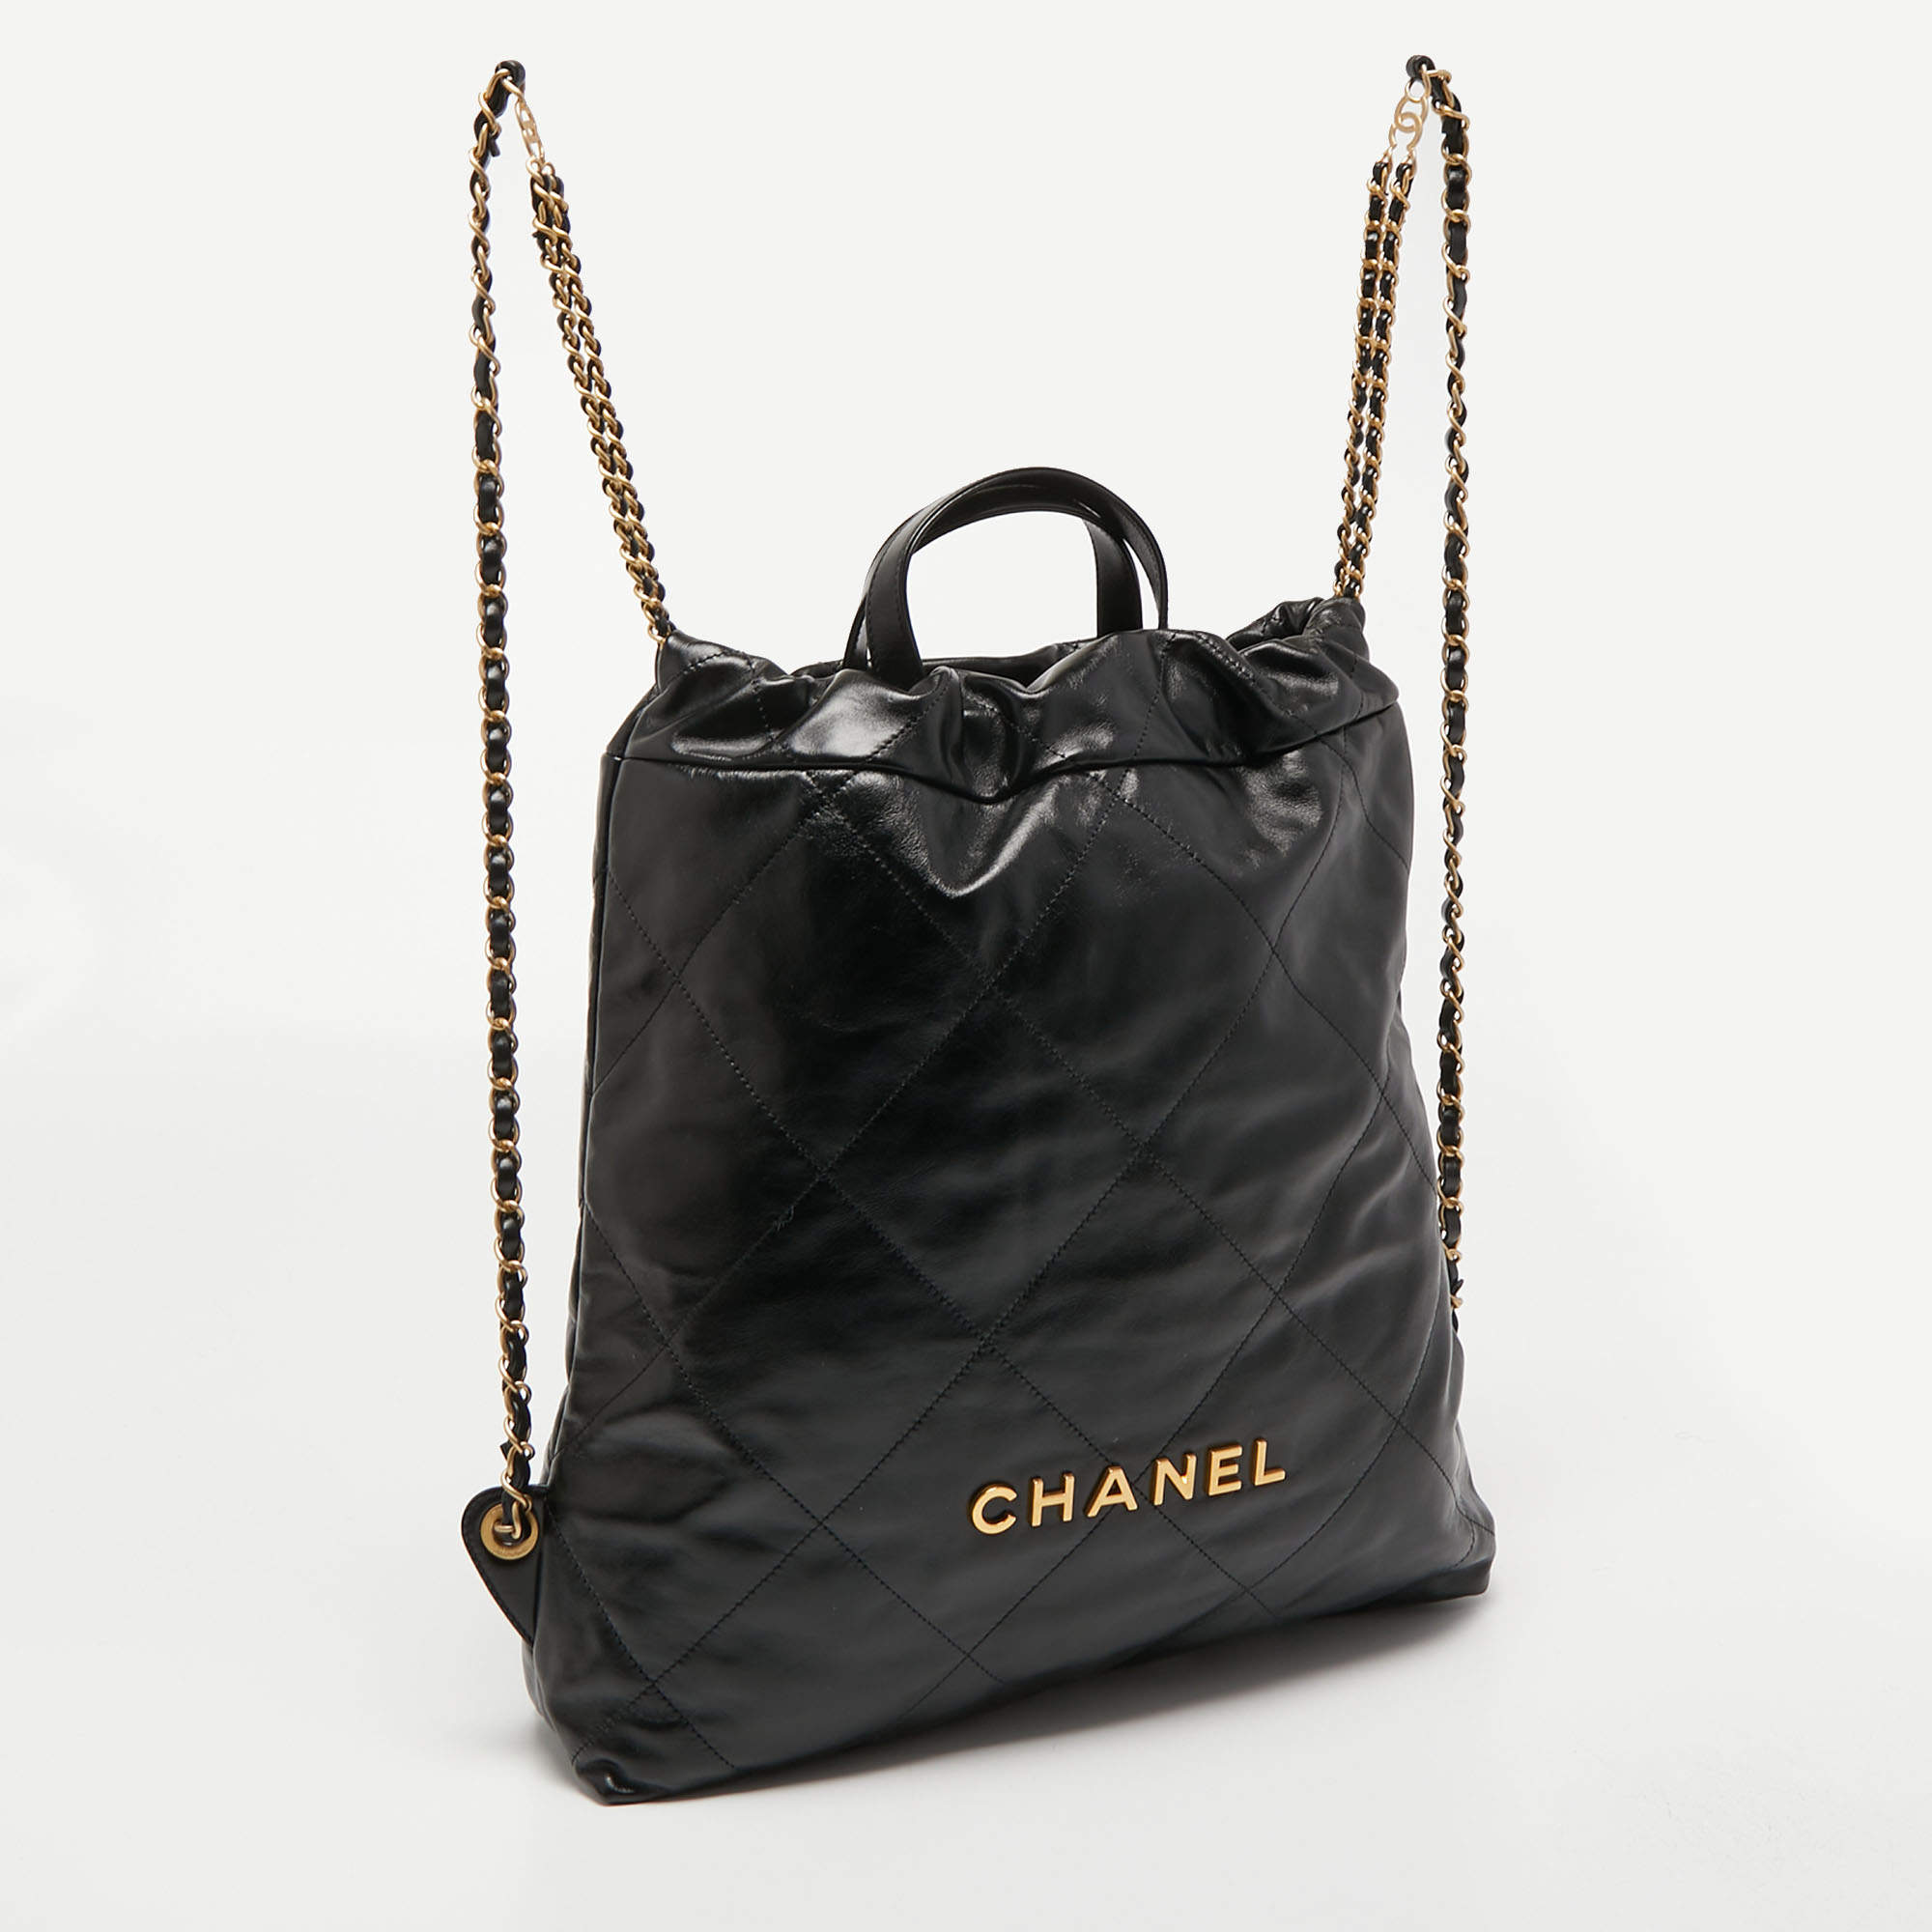 CHANEL Shiny Calfskin Quilted Chanel 22 Backpack Black 1045292